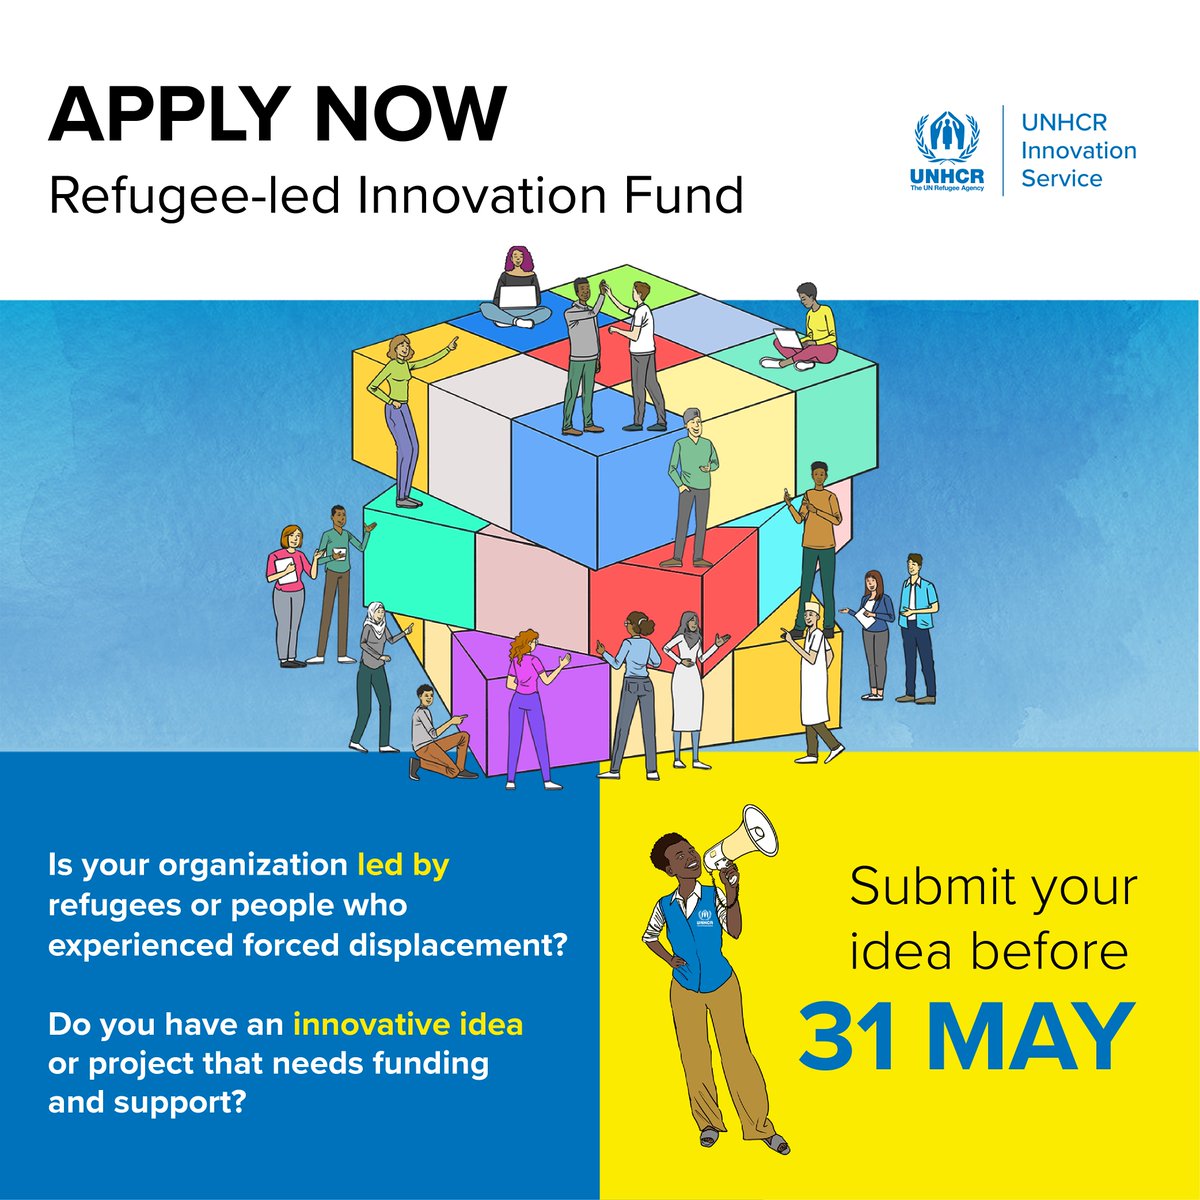 📢 Calling all refugee-led organizations! We want to hear your forward-thinking ideas to bring lasting positive change ✨ Apply now to UNHCR’s Refugee-led Innovation Fund: bit.ly/3QkHRey